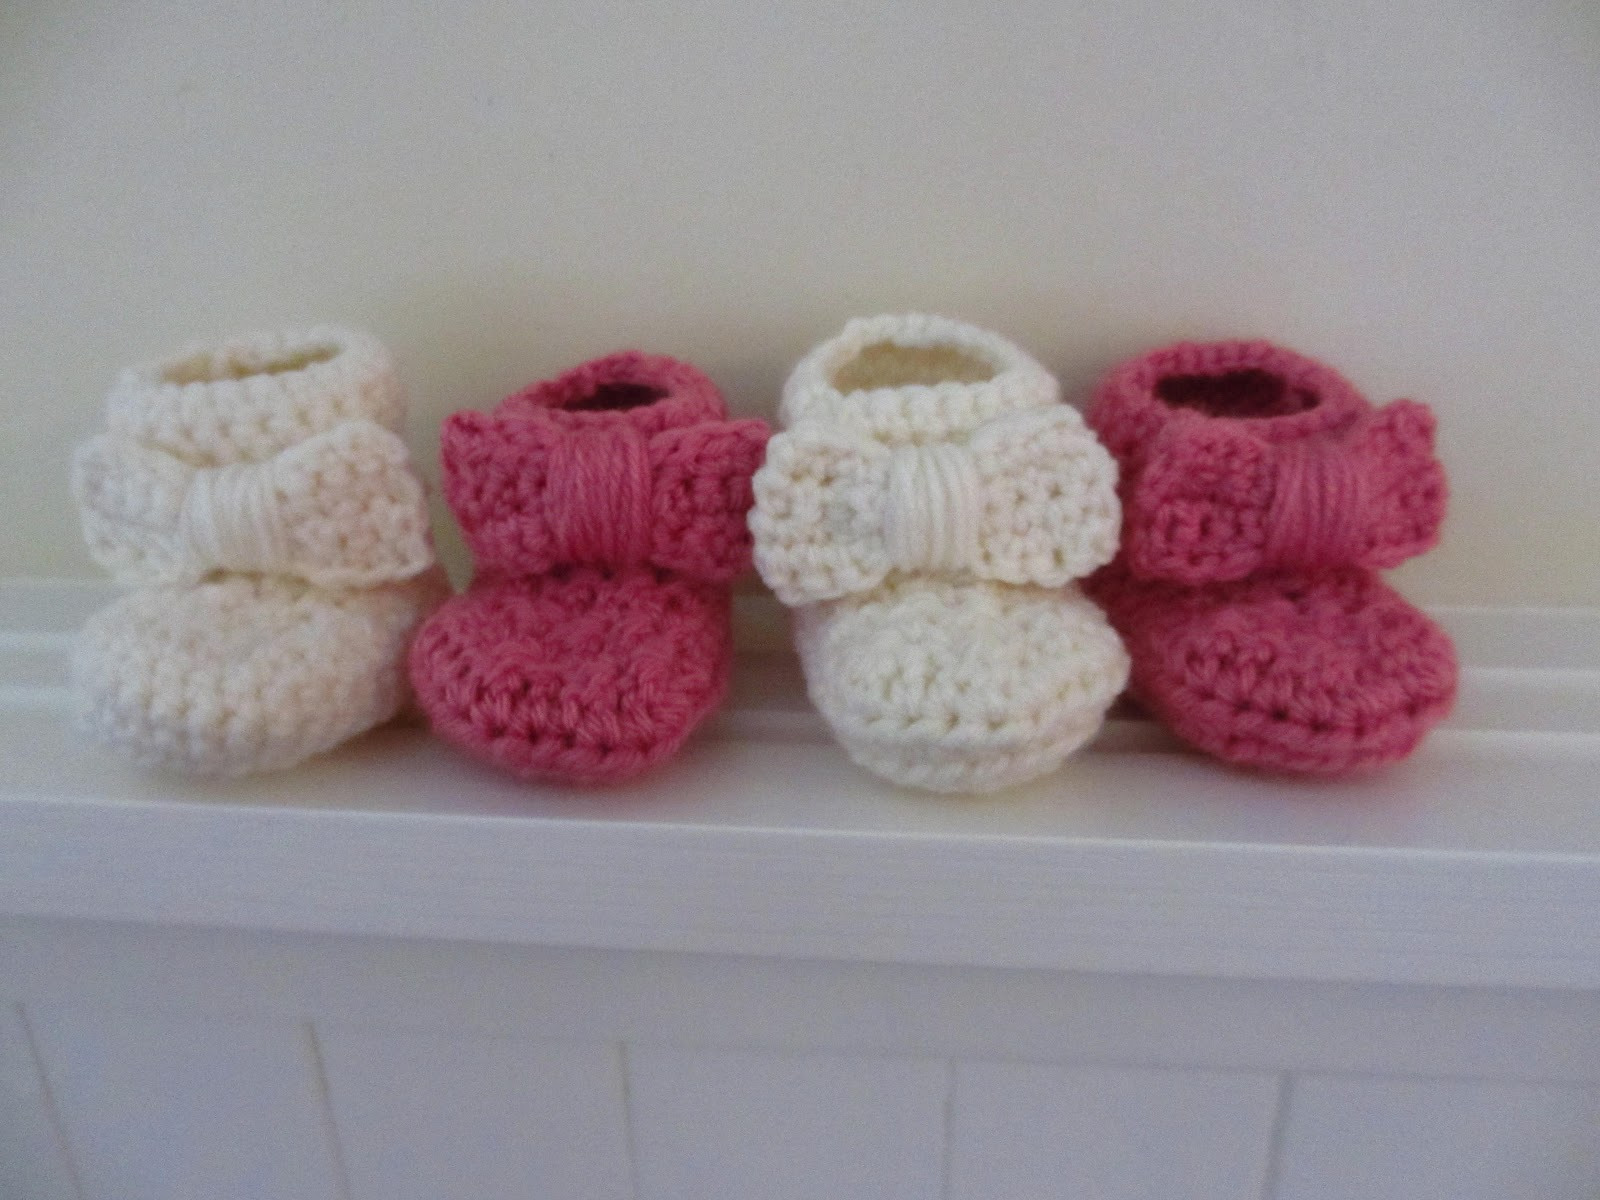 Crochet Pattern For Baby Booties Bootie Licious Crochet Patterns 8 Ba Booties Stitch And Unwind